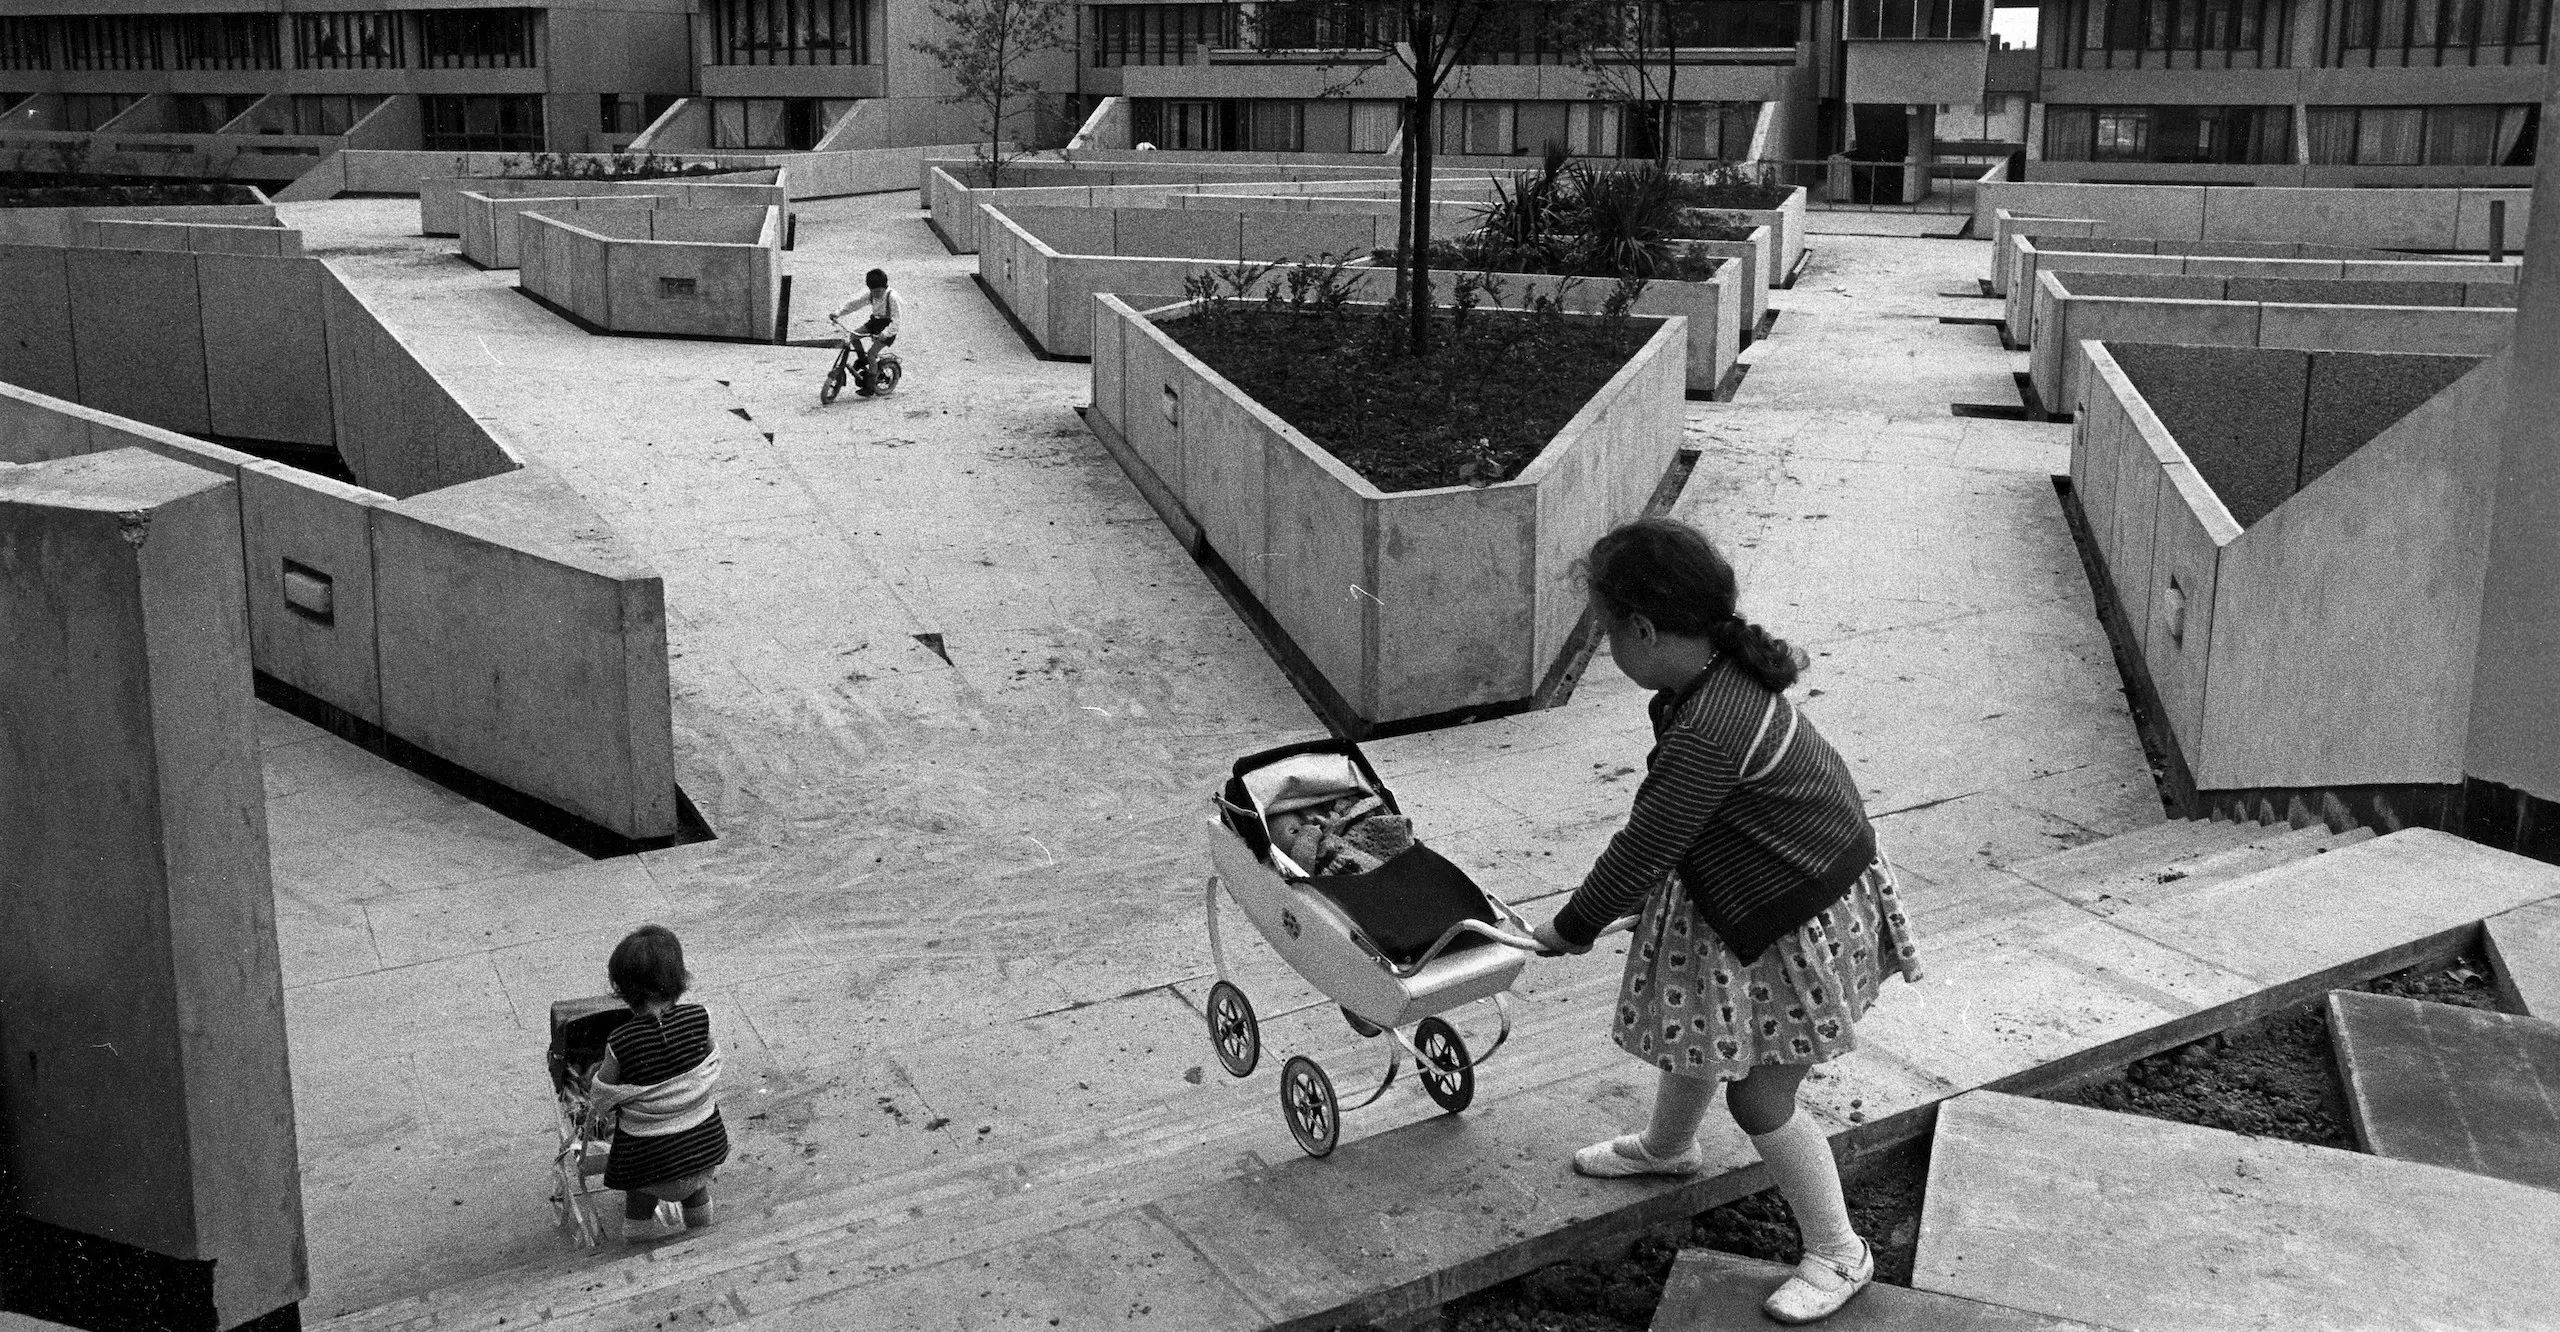 A black and white photo showing two children pushing prams on stairs in a concrete courtyard while another cycles in the distance.